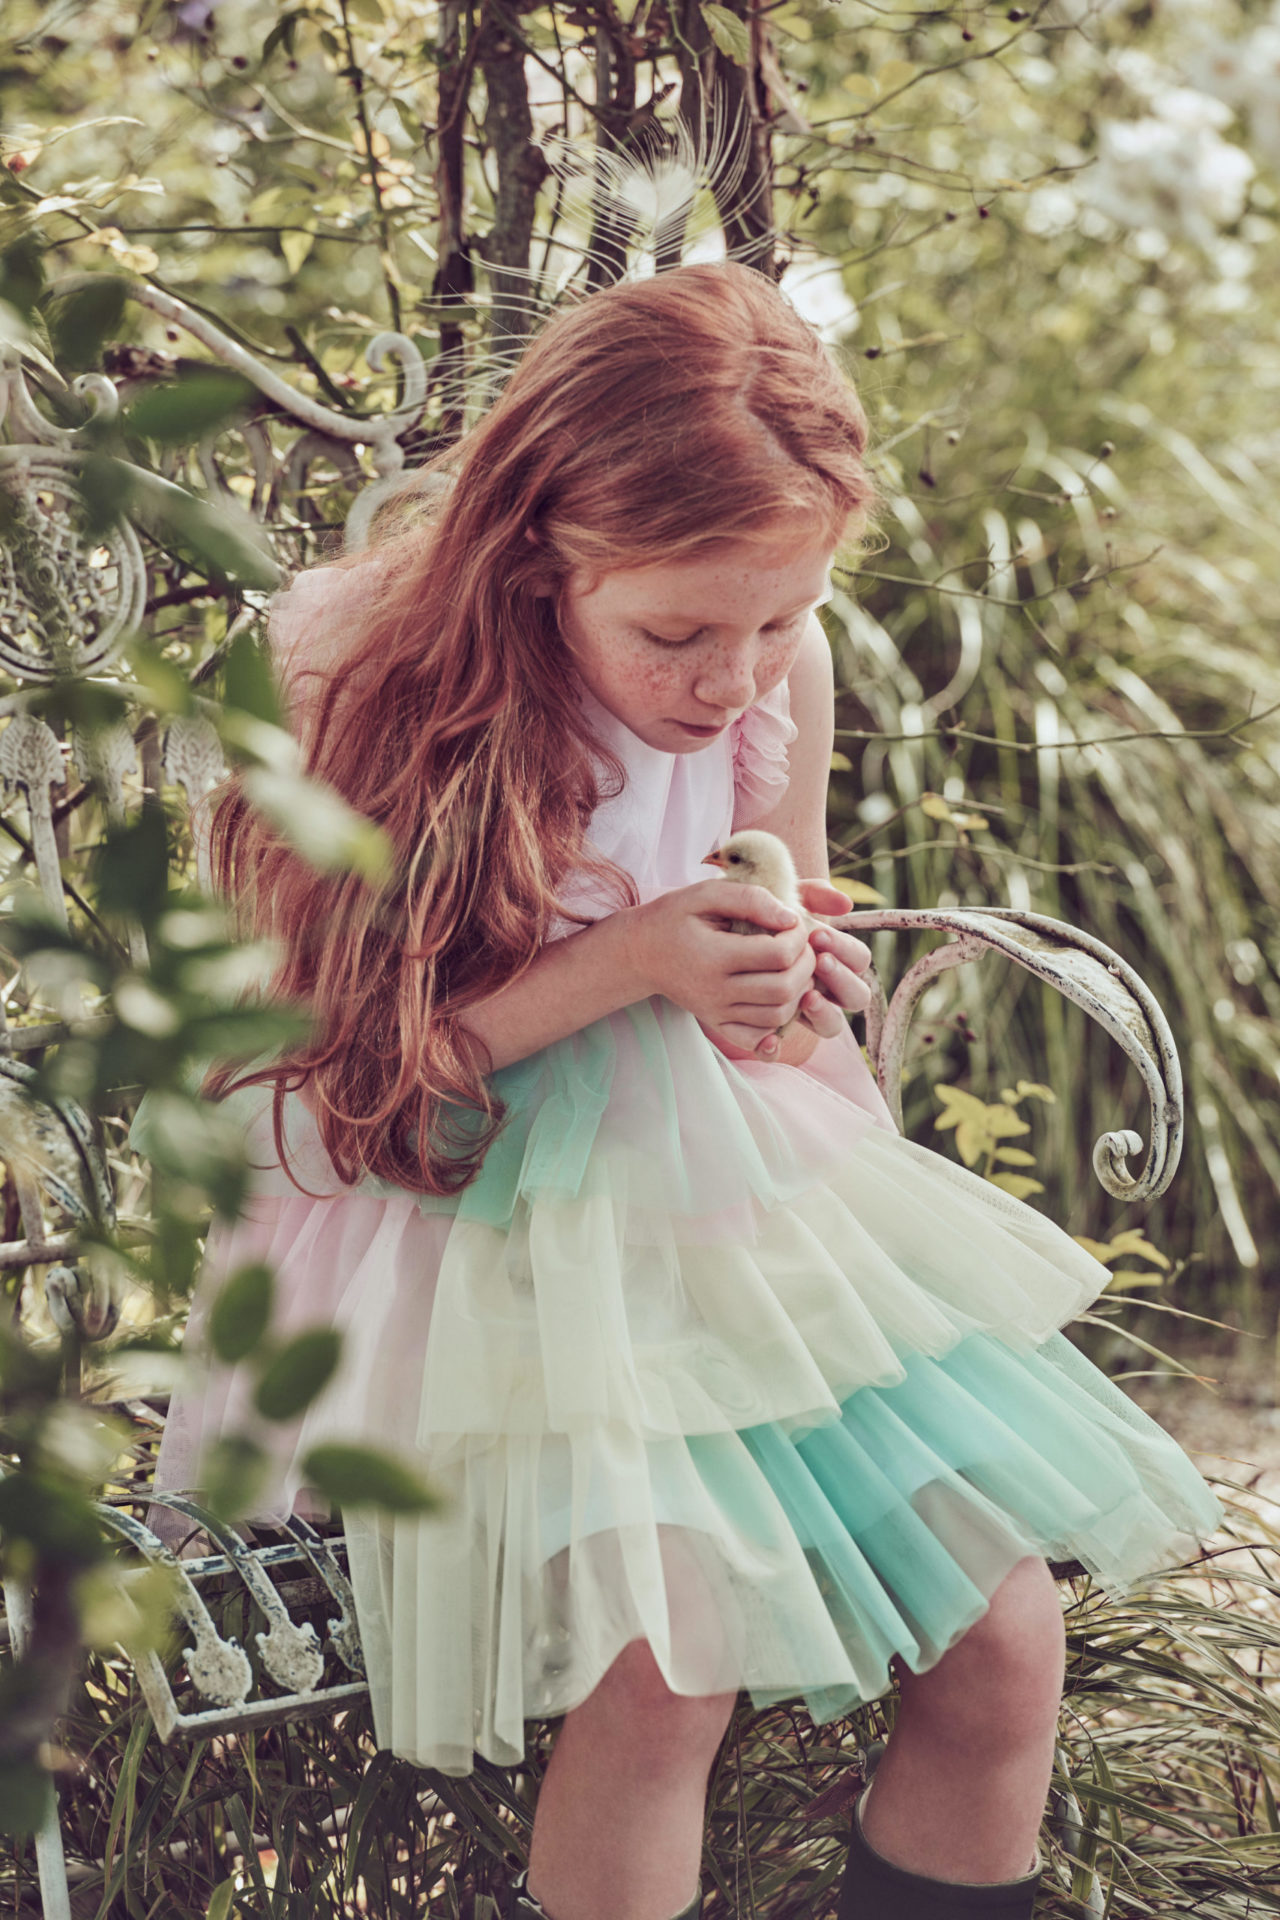 This summers fashion trend for tulle in a beautiful girls dress by Il Gufo